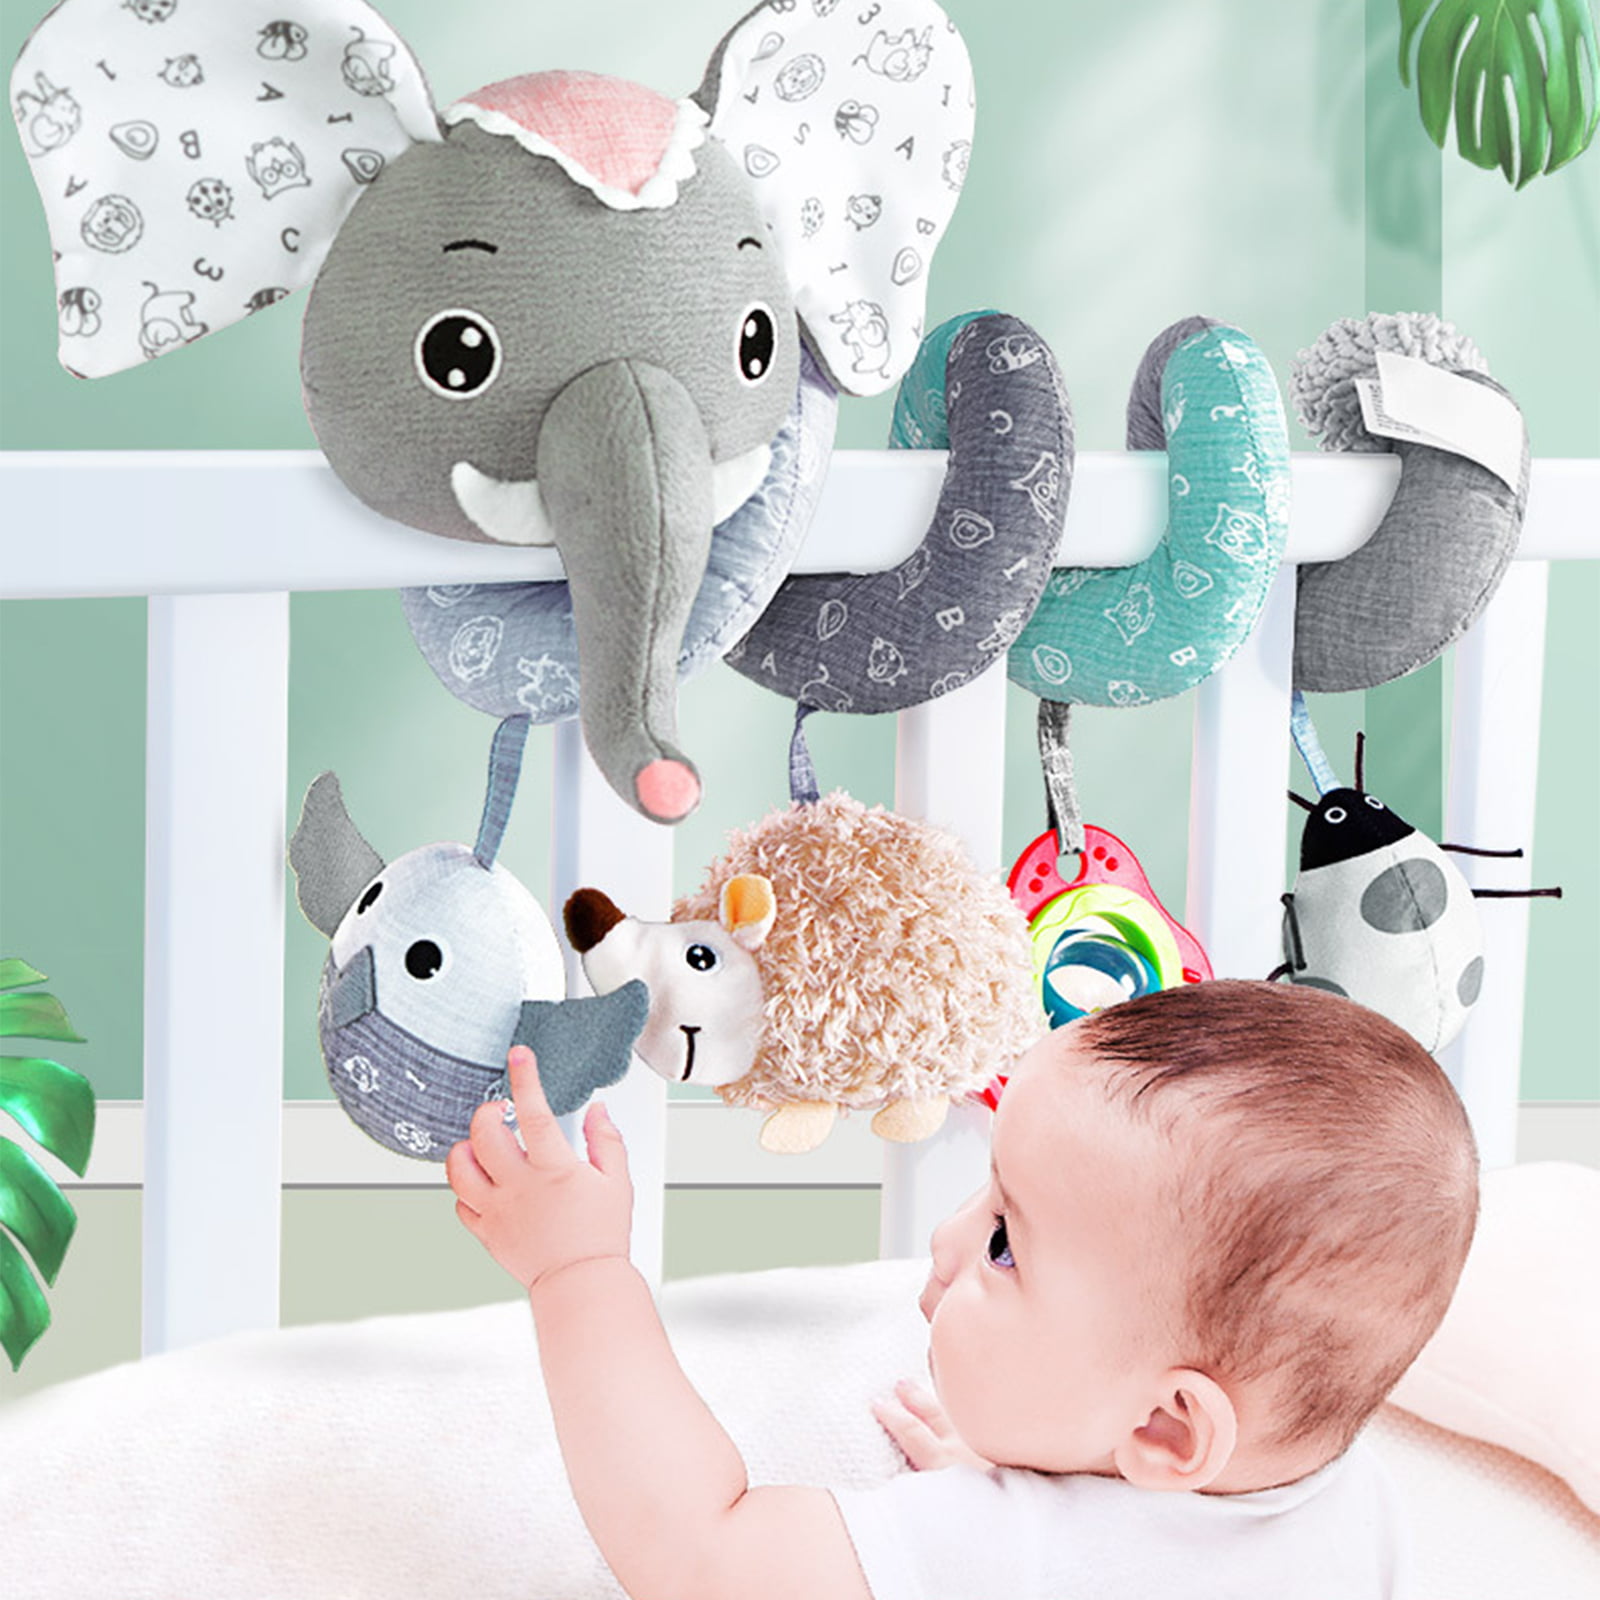 Baby Elephant Bed Stroller Rattle Plush Mobile Toy Kids Ring Bell Crib Doll S 